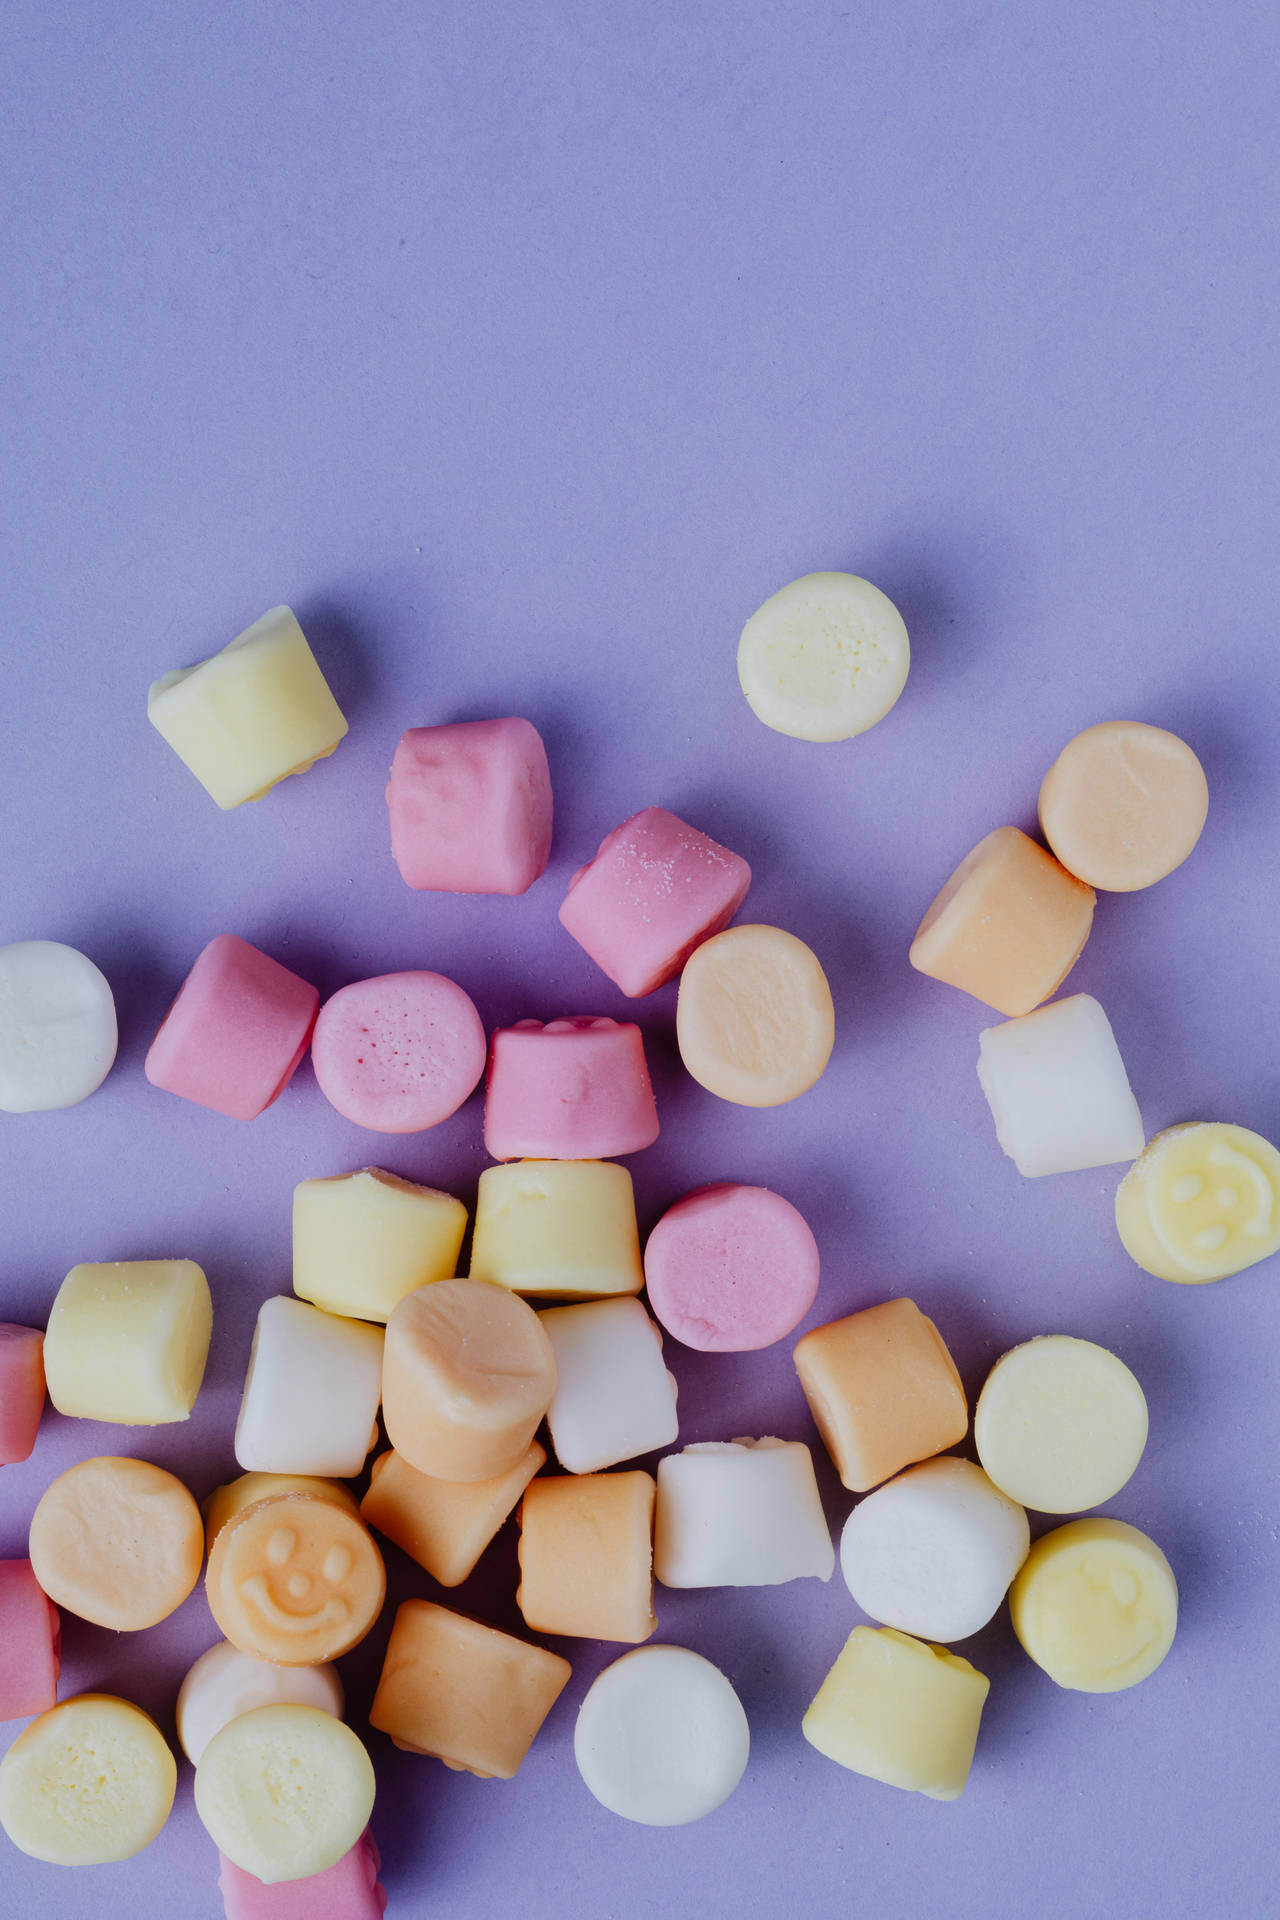 Pastel Candies For Colorful Background Wallpaper